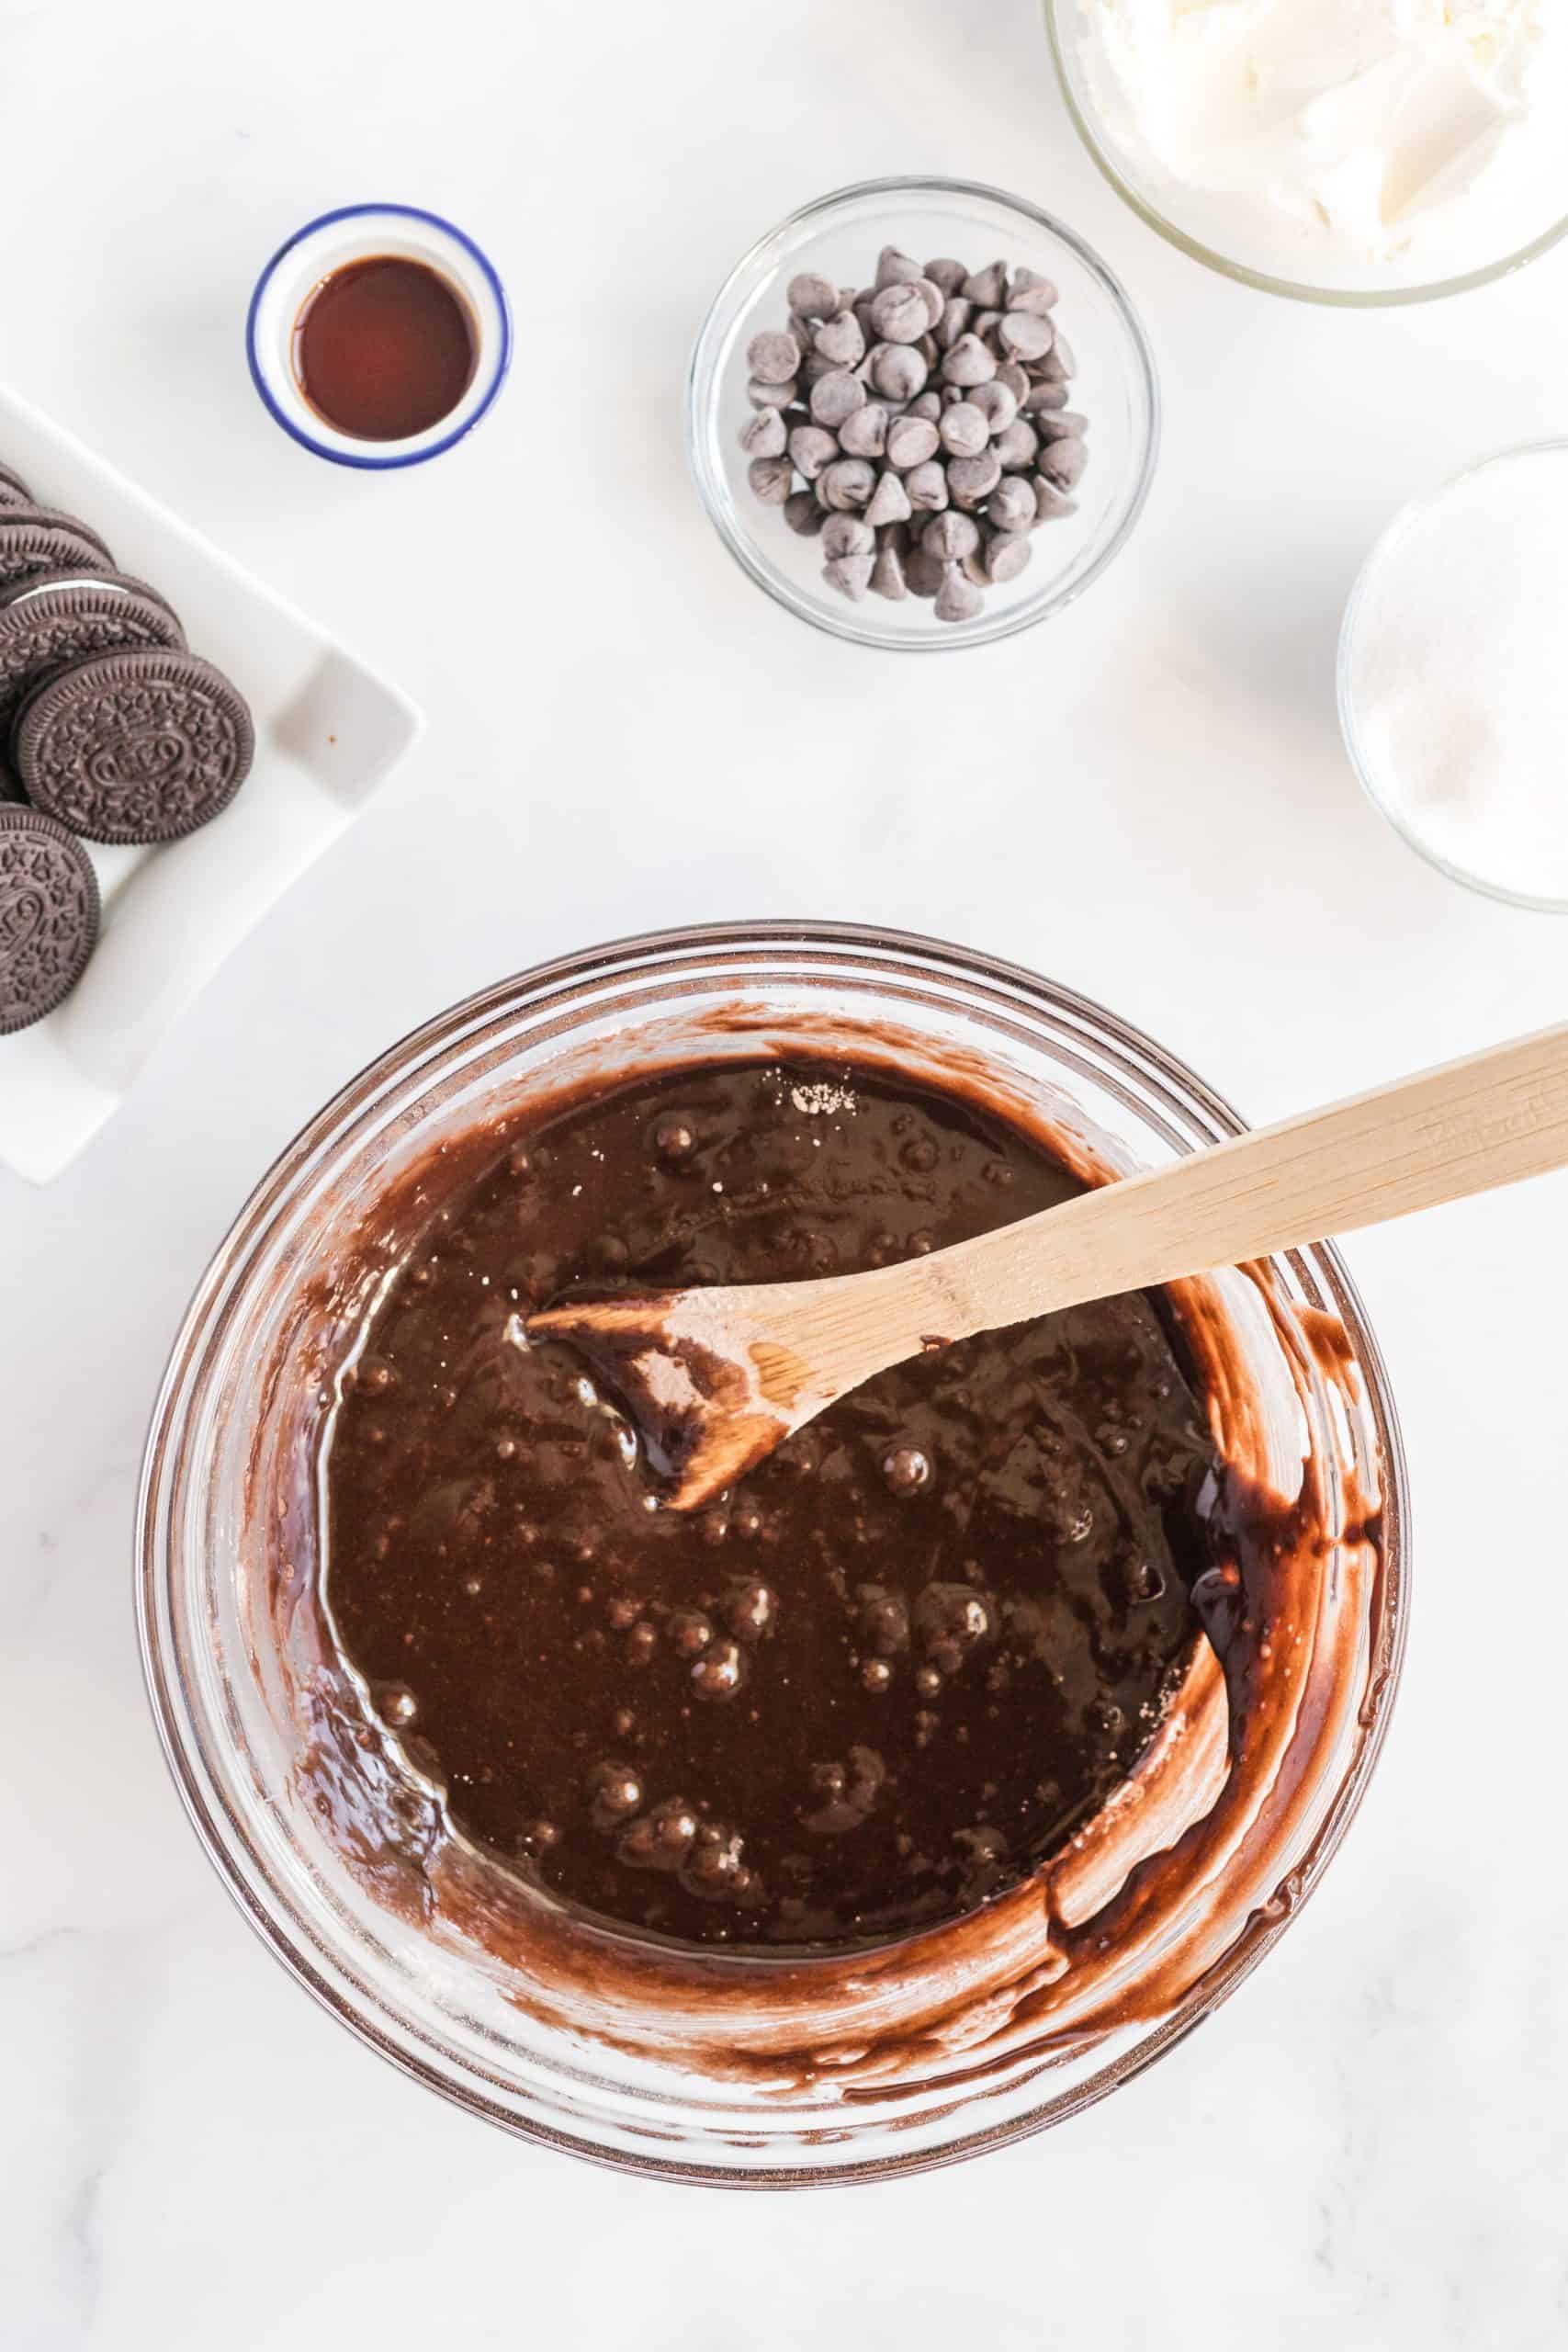 Mixed up brownie mix in bowl in a clear bowl with a wooden spoon.